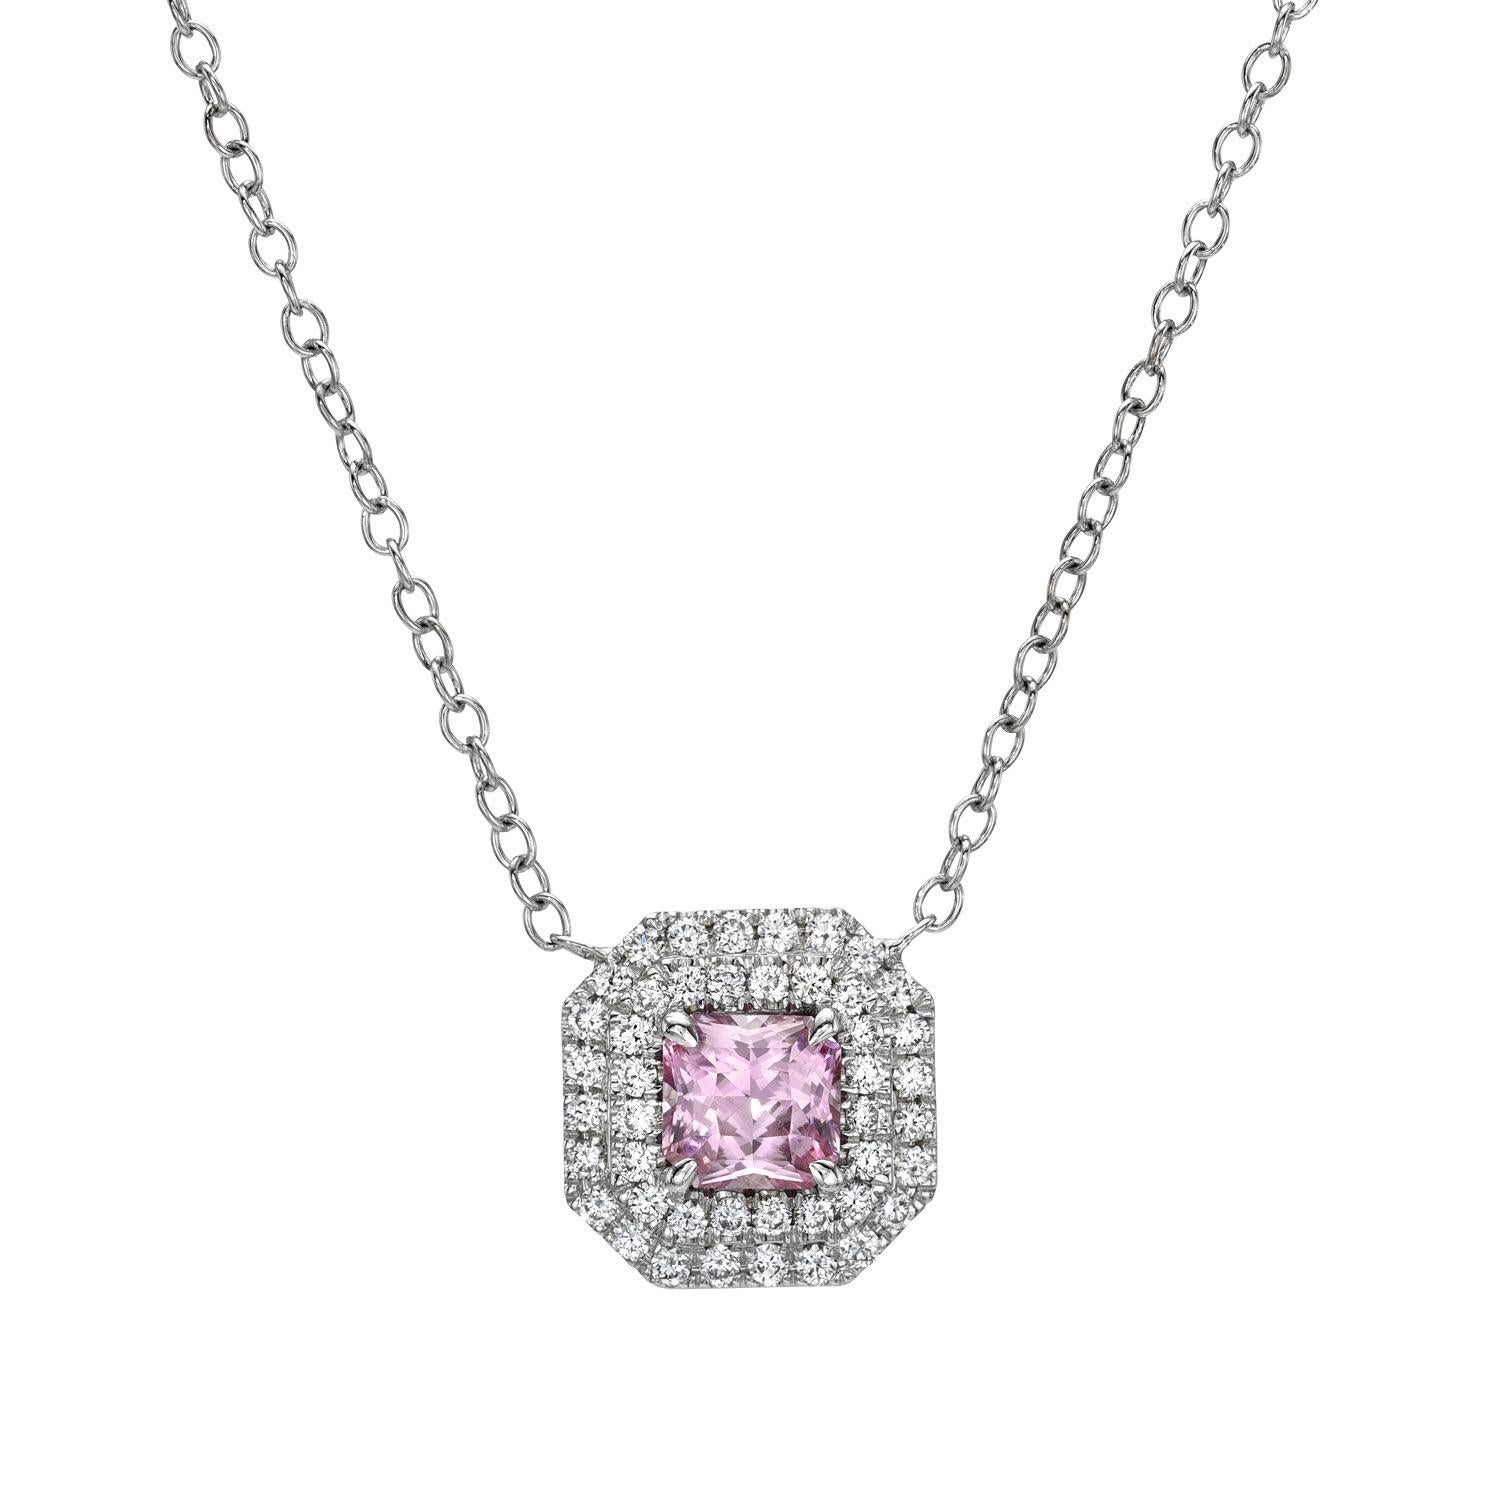 14K white gold necklace set with a 0.79 carat Purple-Pink Sapphire square radiant cut, decorated with a total of 0.27 carat round brilliant diamonds.

Returns are accepted and paid by us within 7 days of delivery.

Please FOLLOW the MERKABA